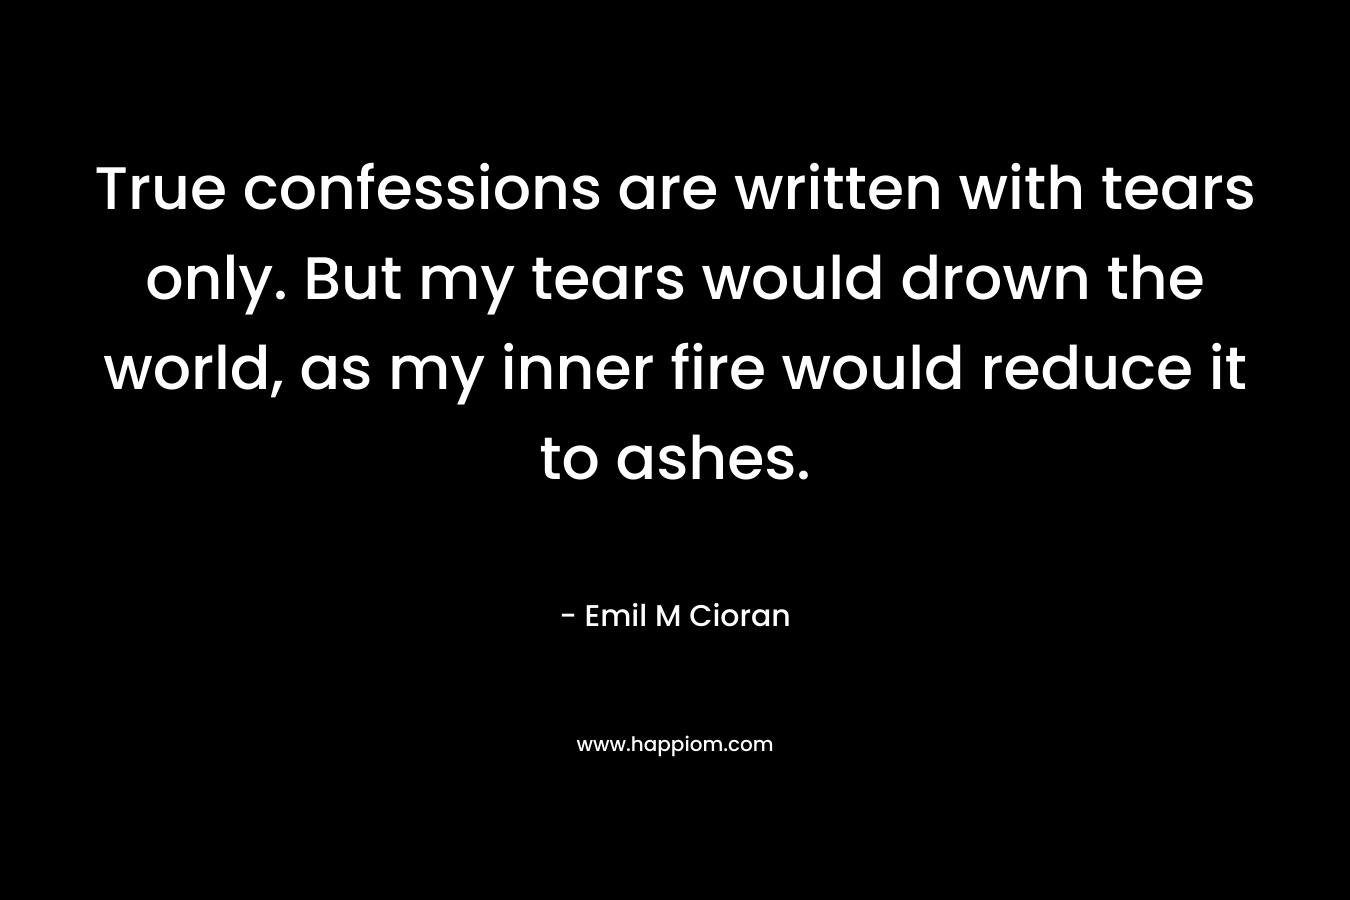 True confessions are written with tears only. But my tears would drown the world, as my inner fire would reduce it to ashes. – Emil M Cioran